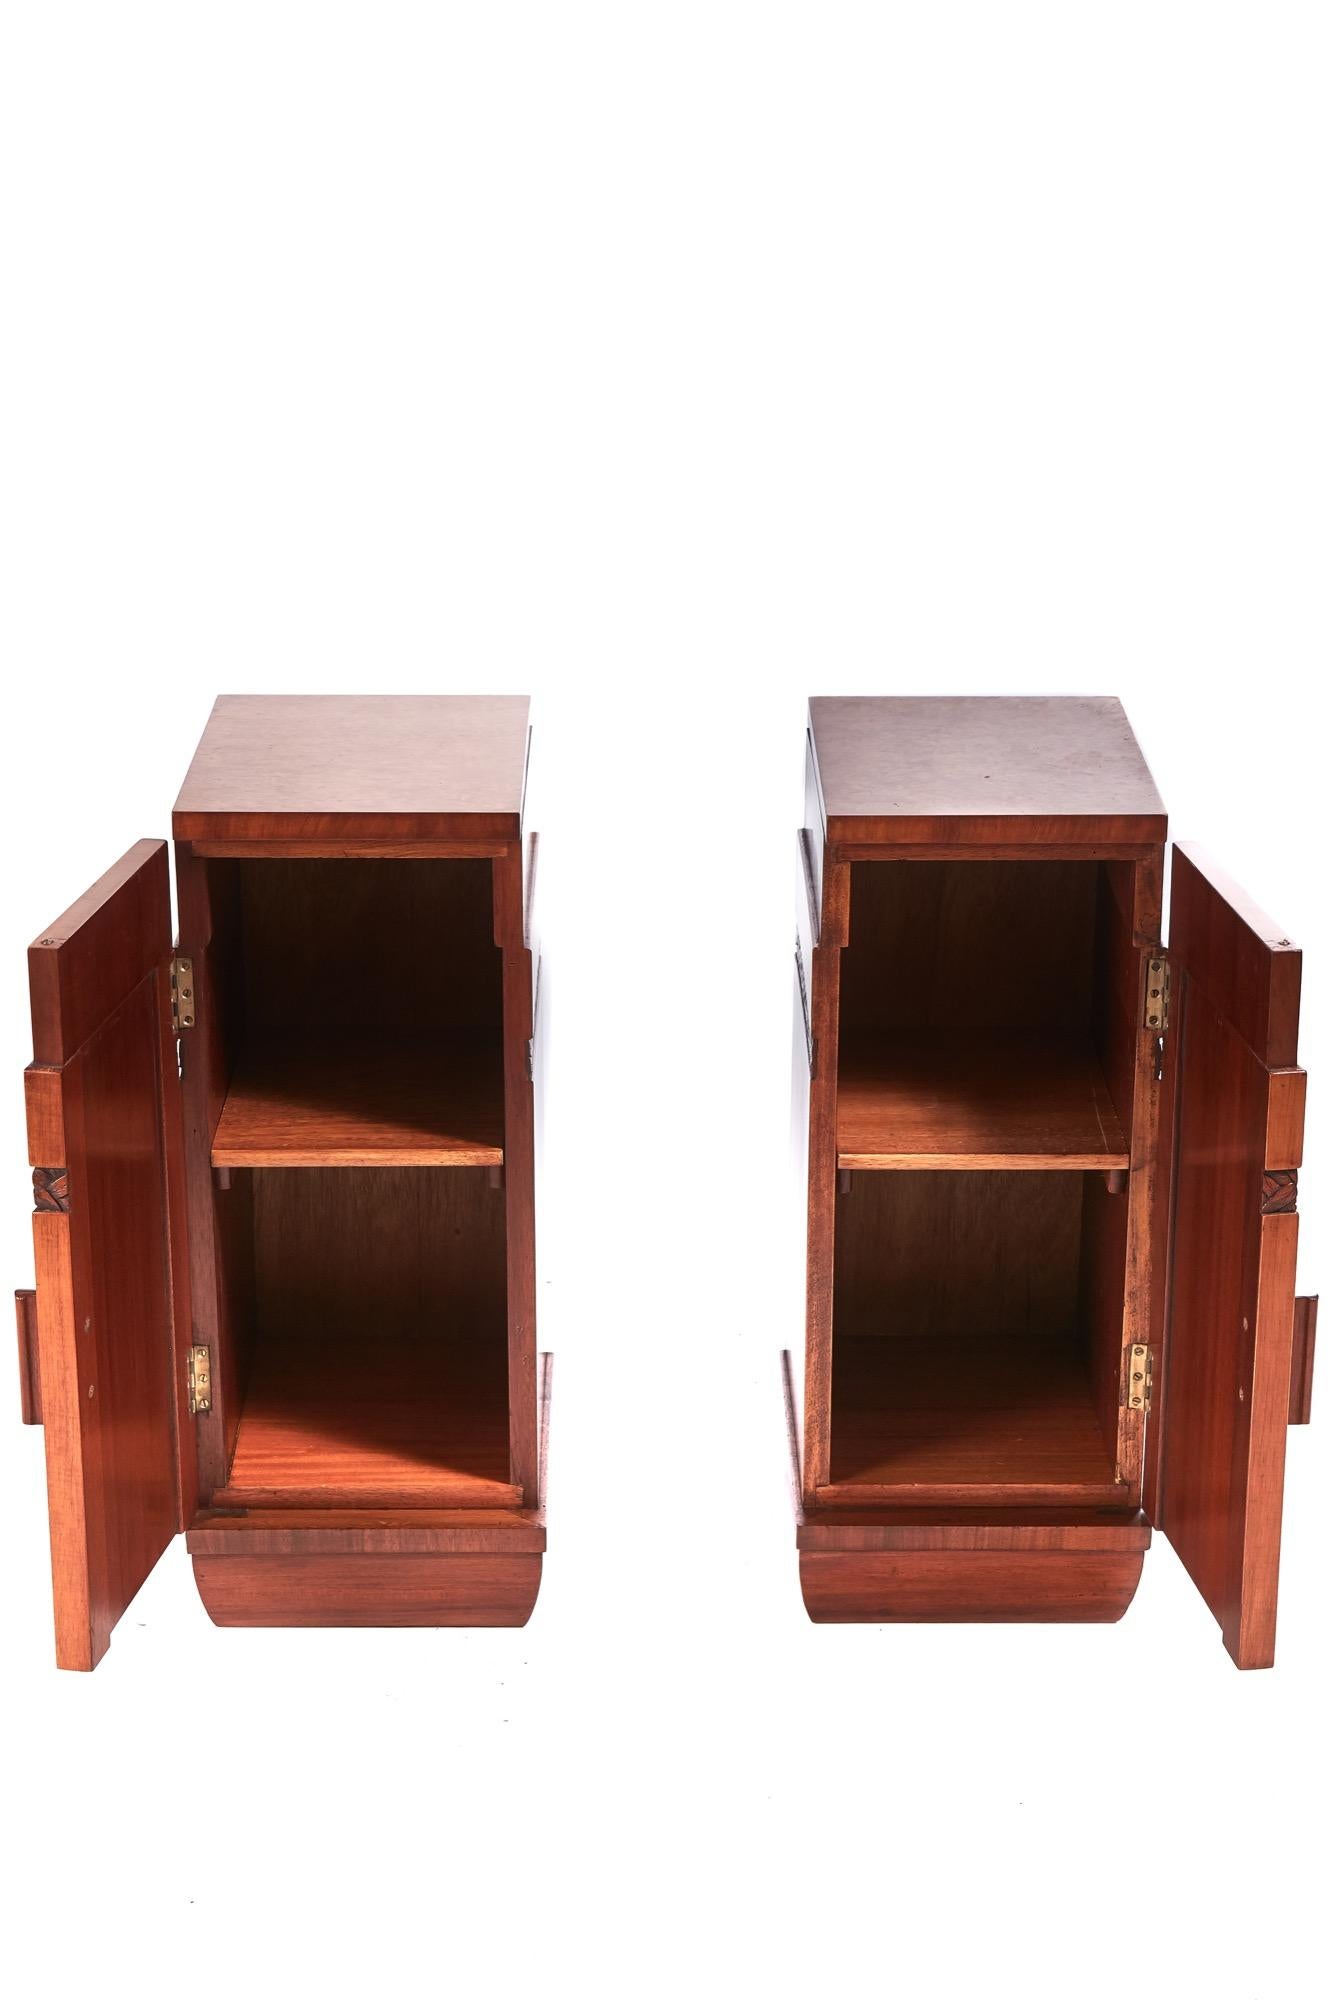 Quality pair of Art Deco bird’s-eye maple bedside cabinets having fantastic bird’s-eye maple tops, long single door banded with unusual carvings. Fitted interior, original handles standing on a plinth base.
Fantastic color and condition
Measures: